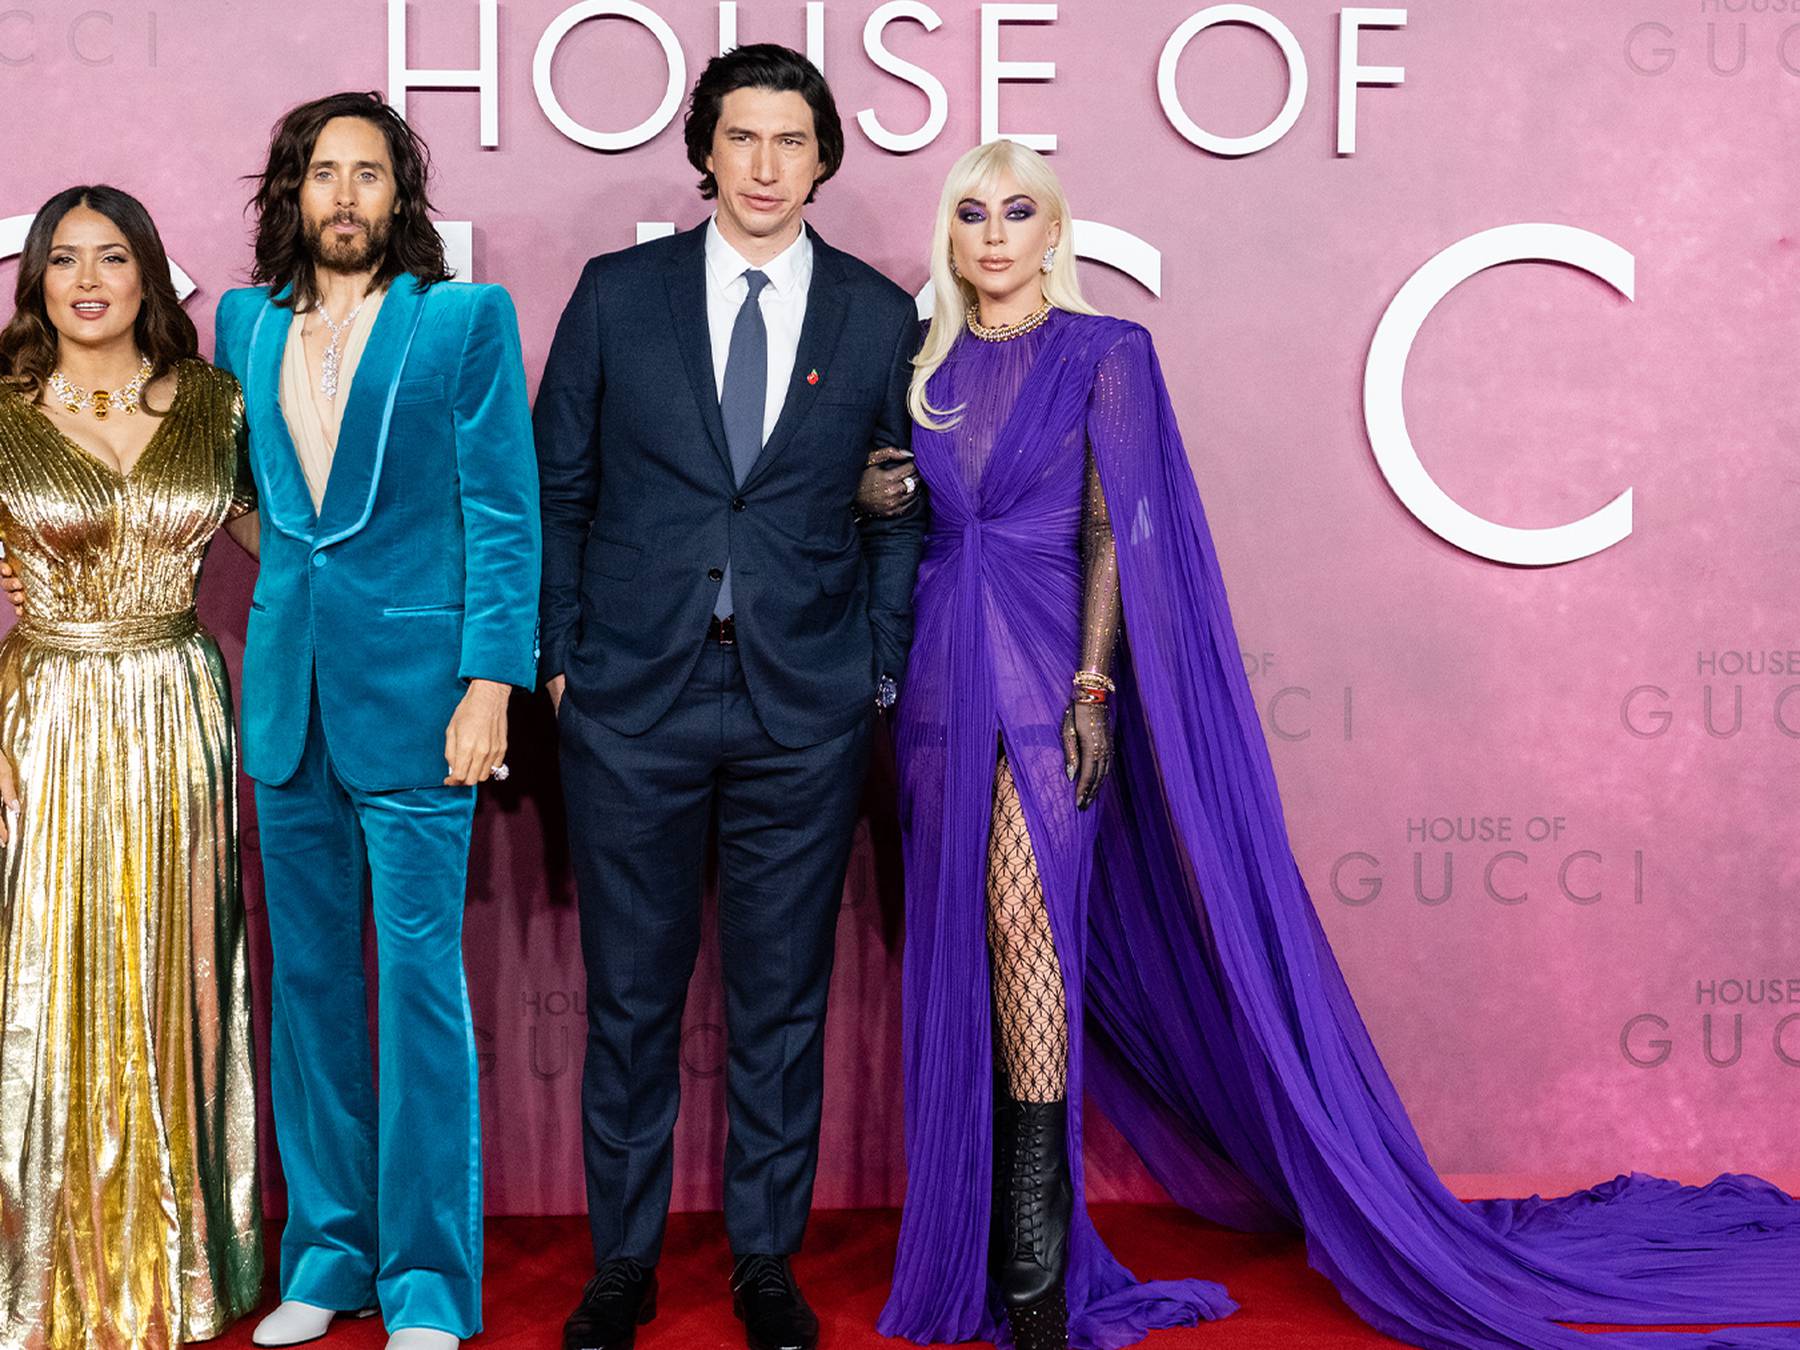 Gucci Family Claim 'House of Gucci' Inaccuracies | BoF